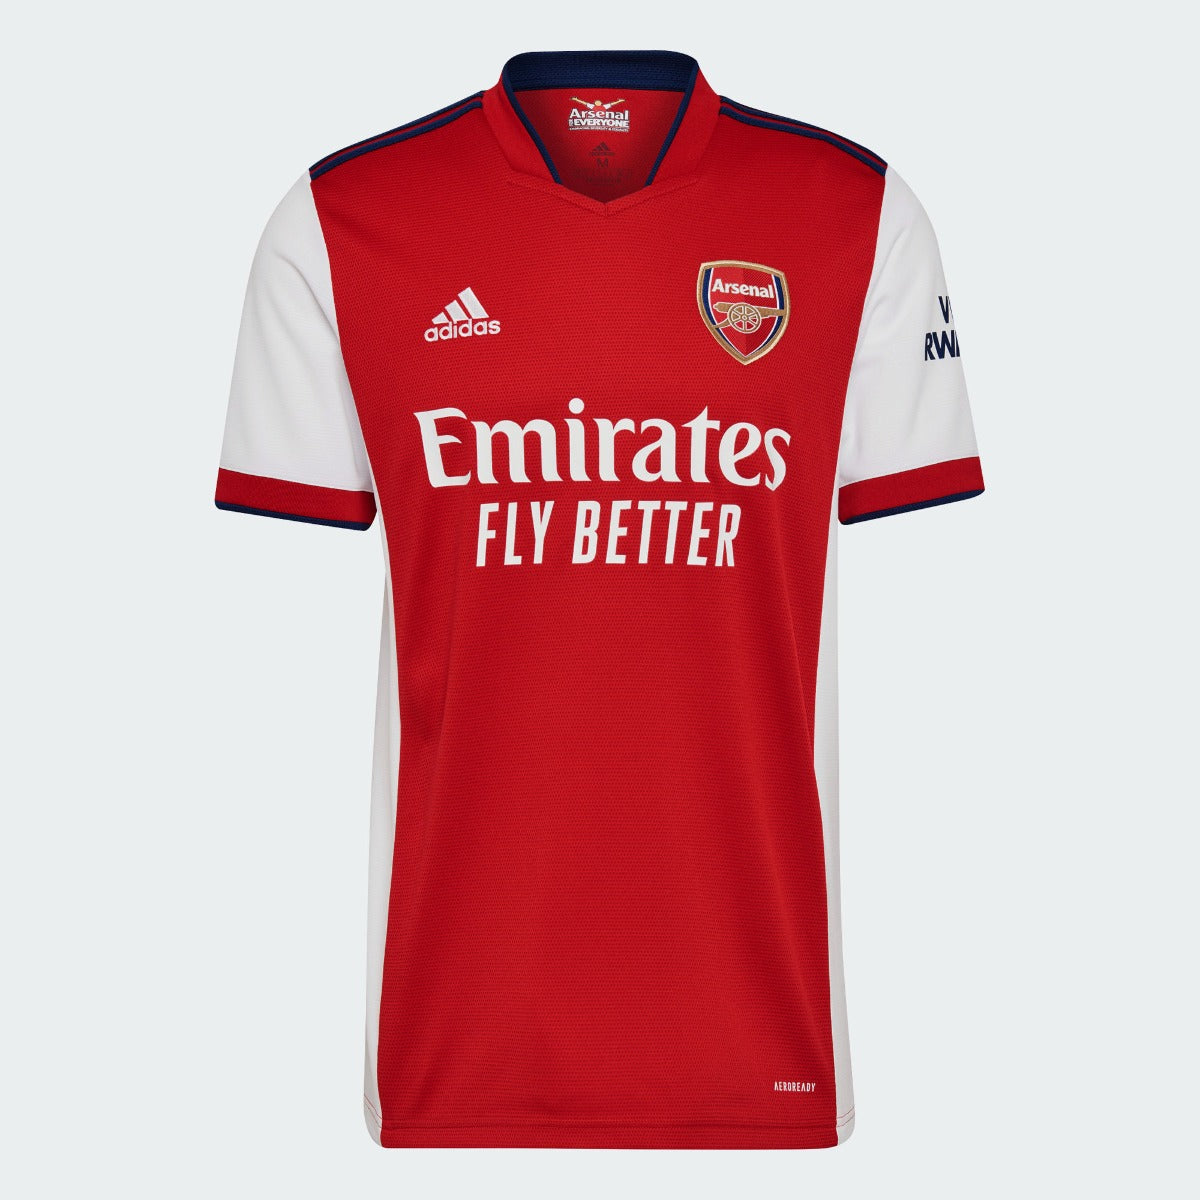 Adidas 2021-22 Arsenal Home Jersey - Red-Navy (Front)